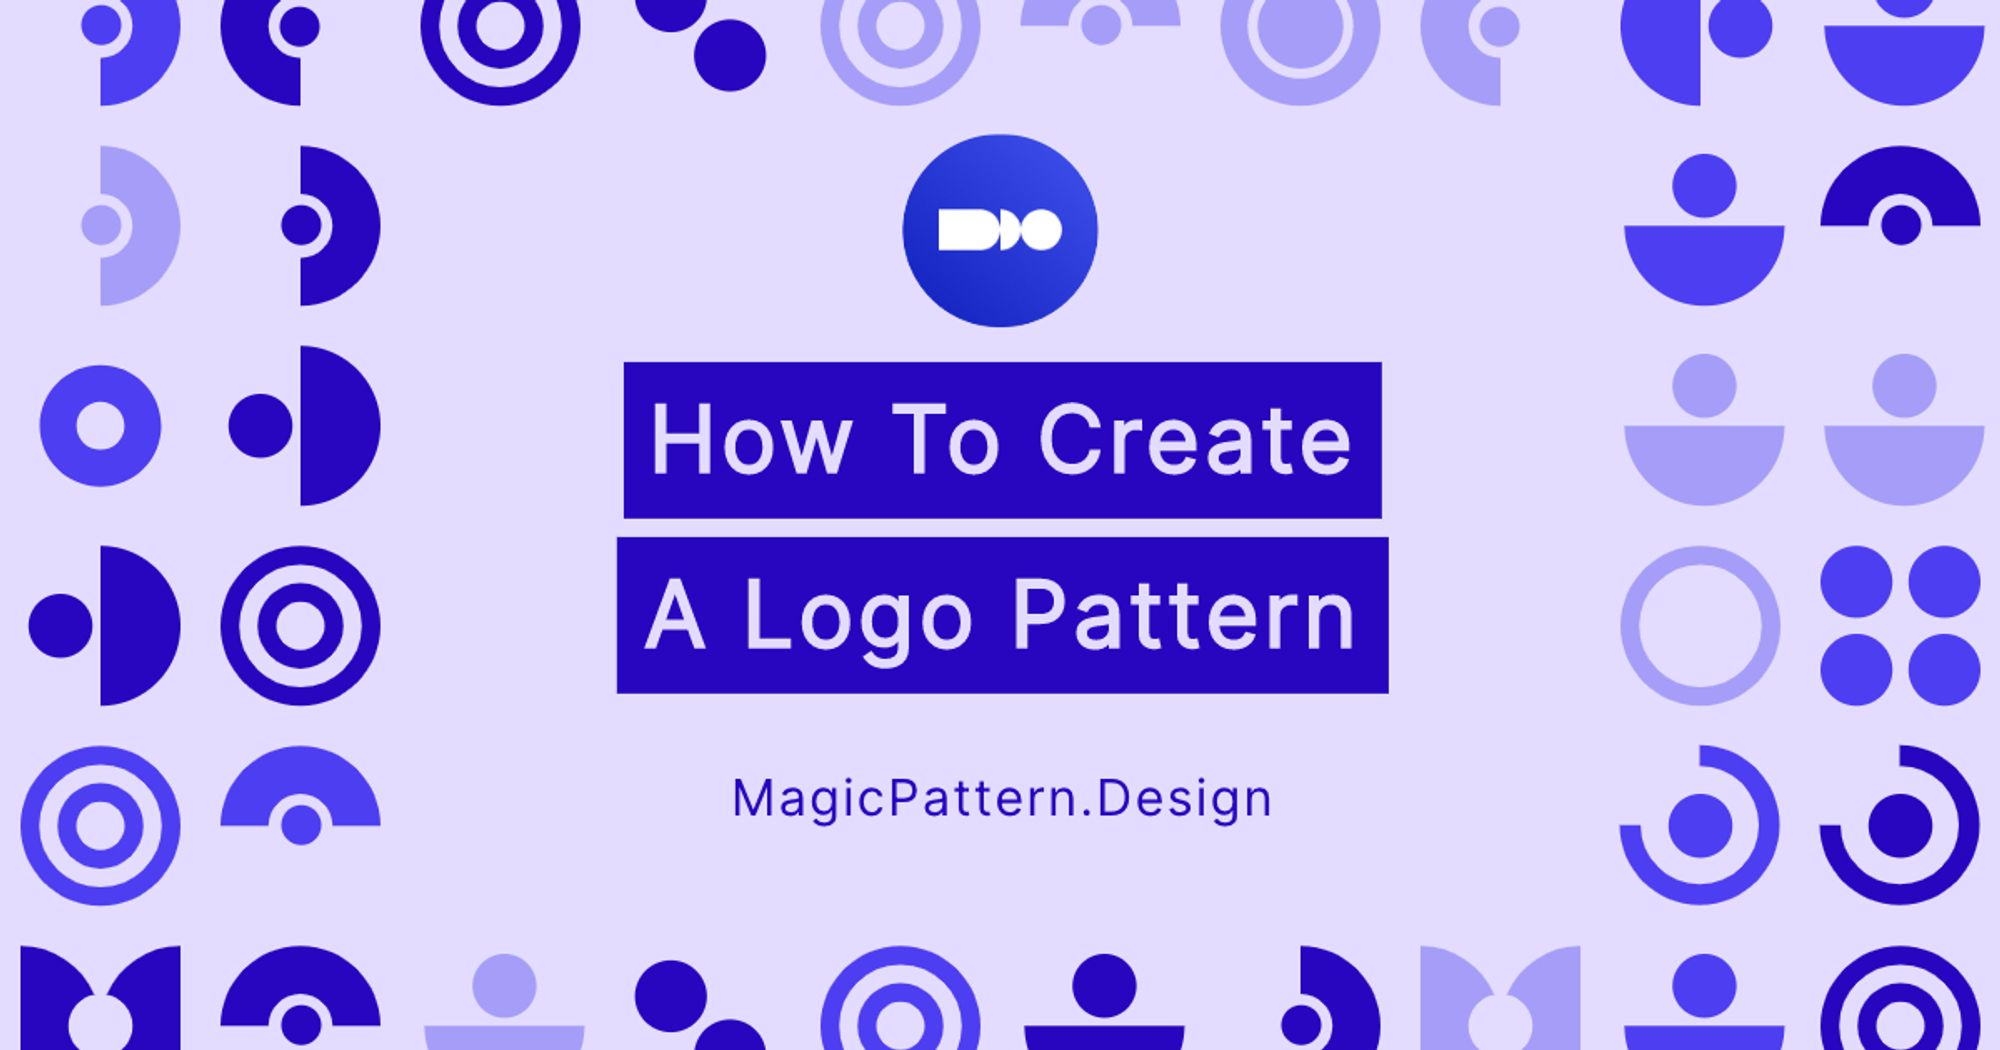 How to create a logo pattern